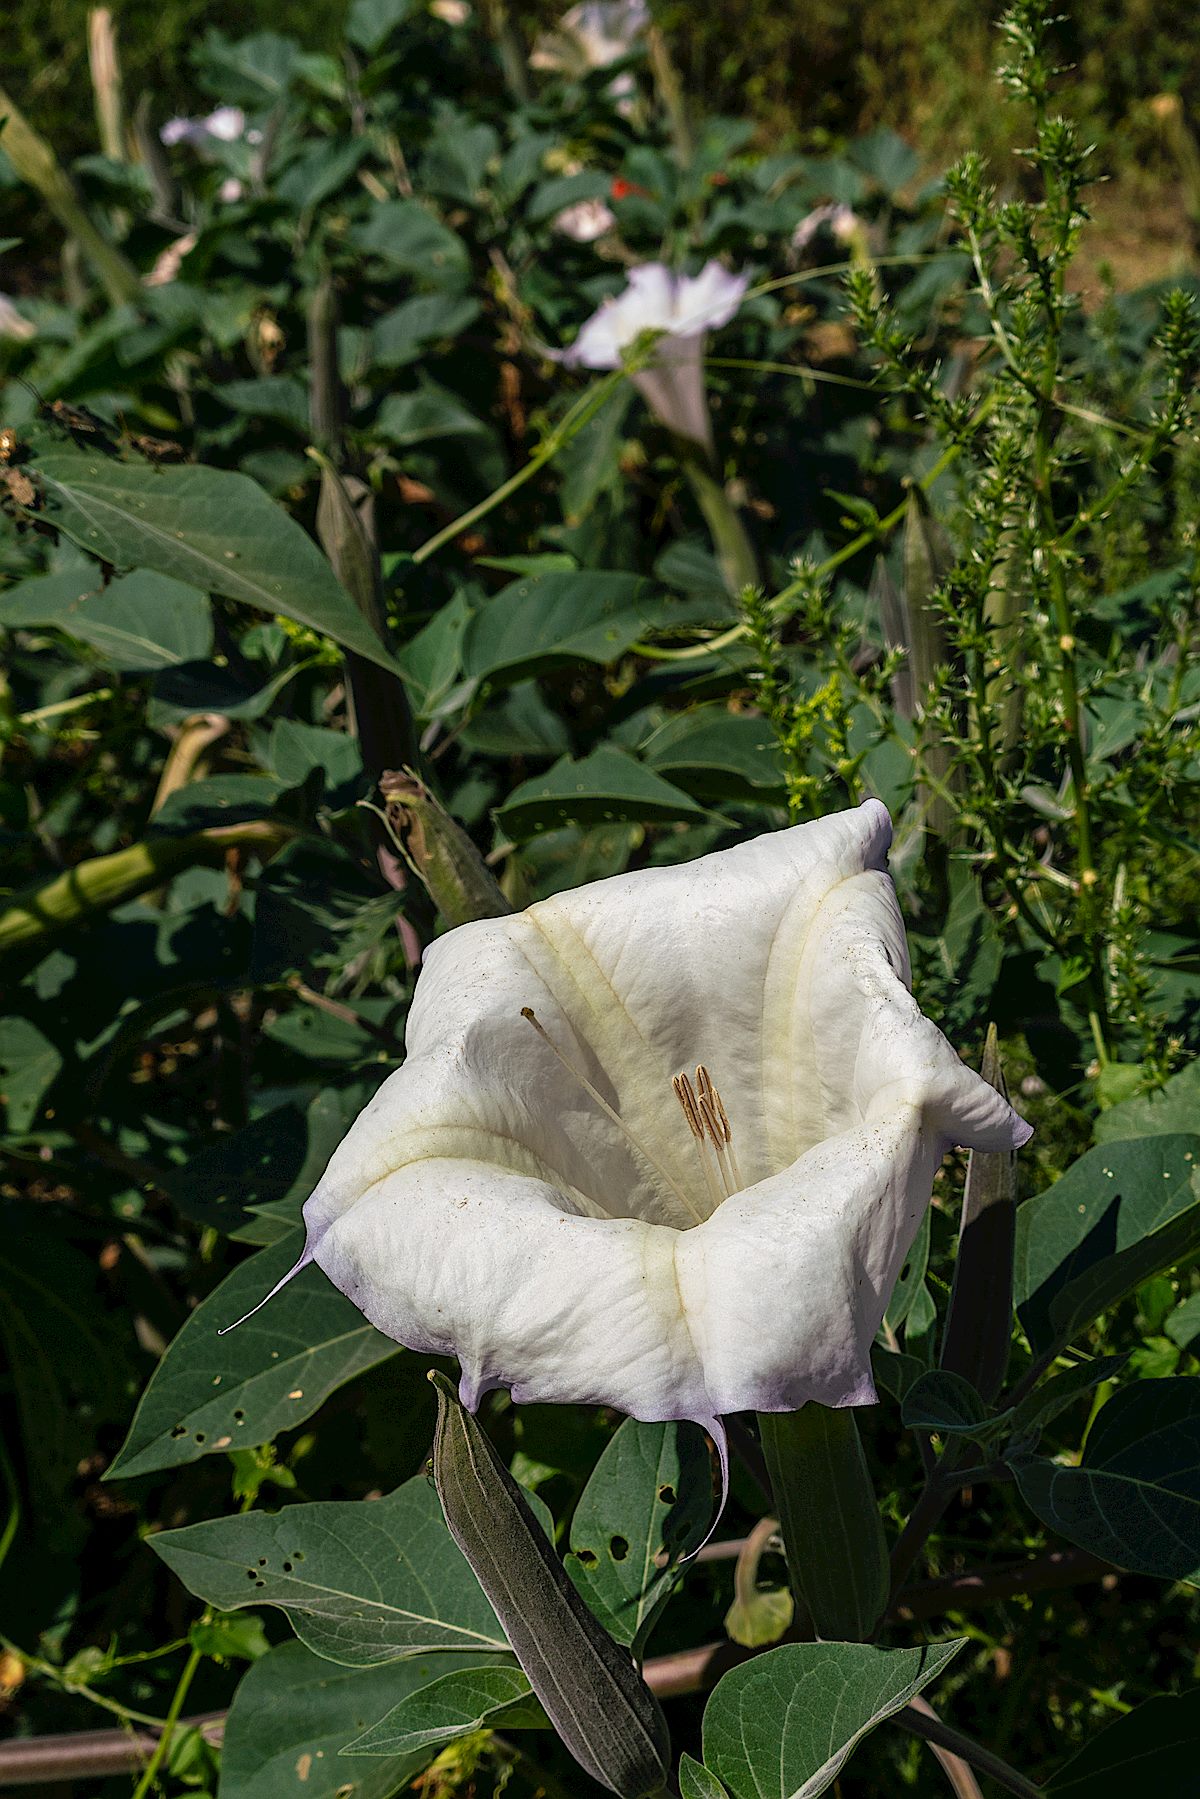 Sacred Datura in the Sycamore Reservoir Area. September 2018.